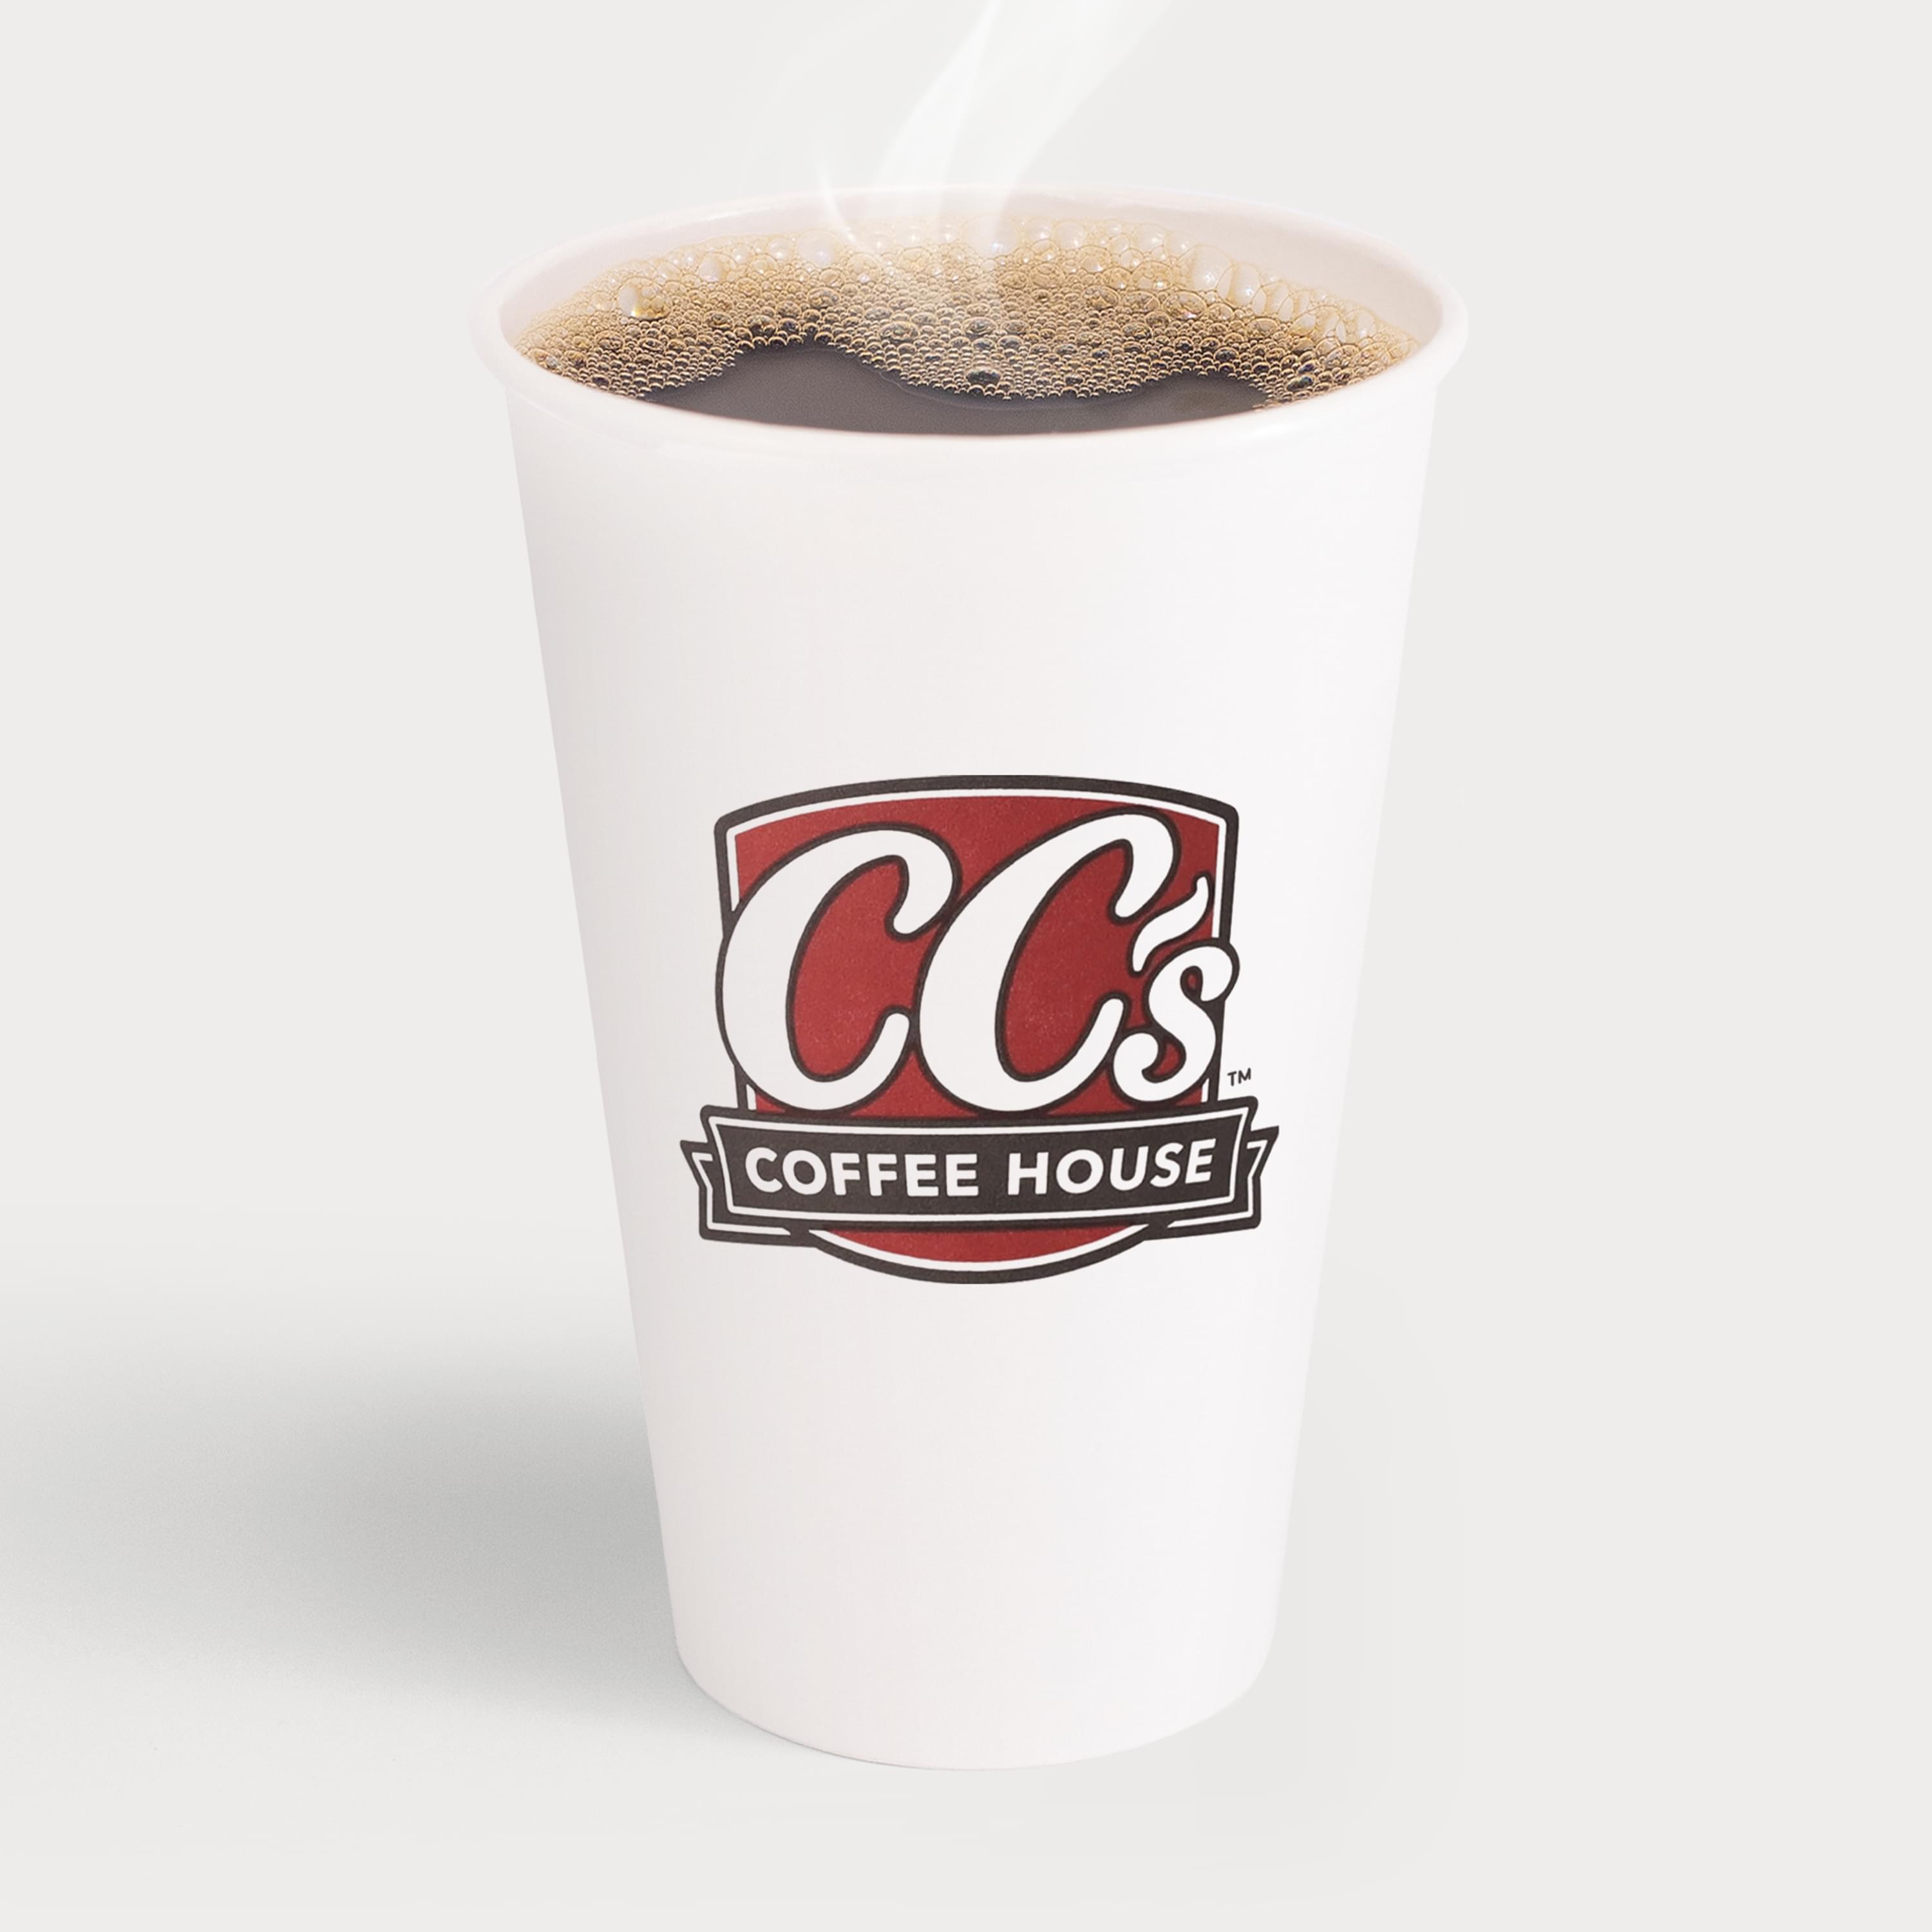 A cup of CC's coffee